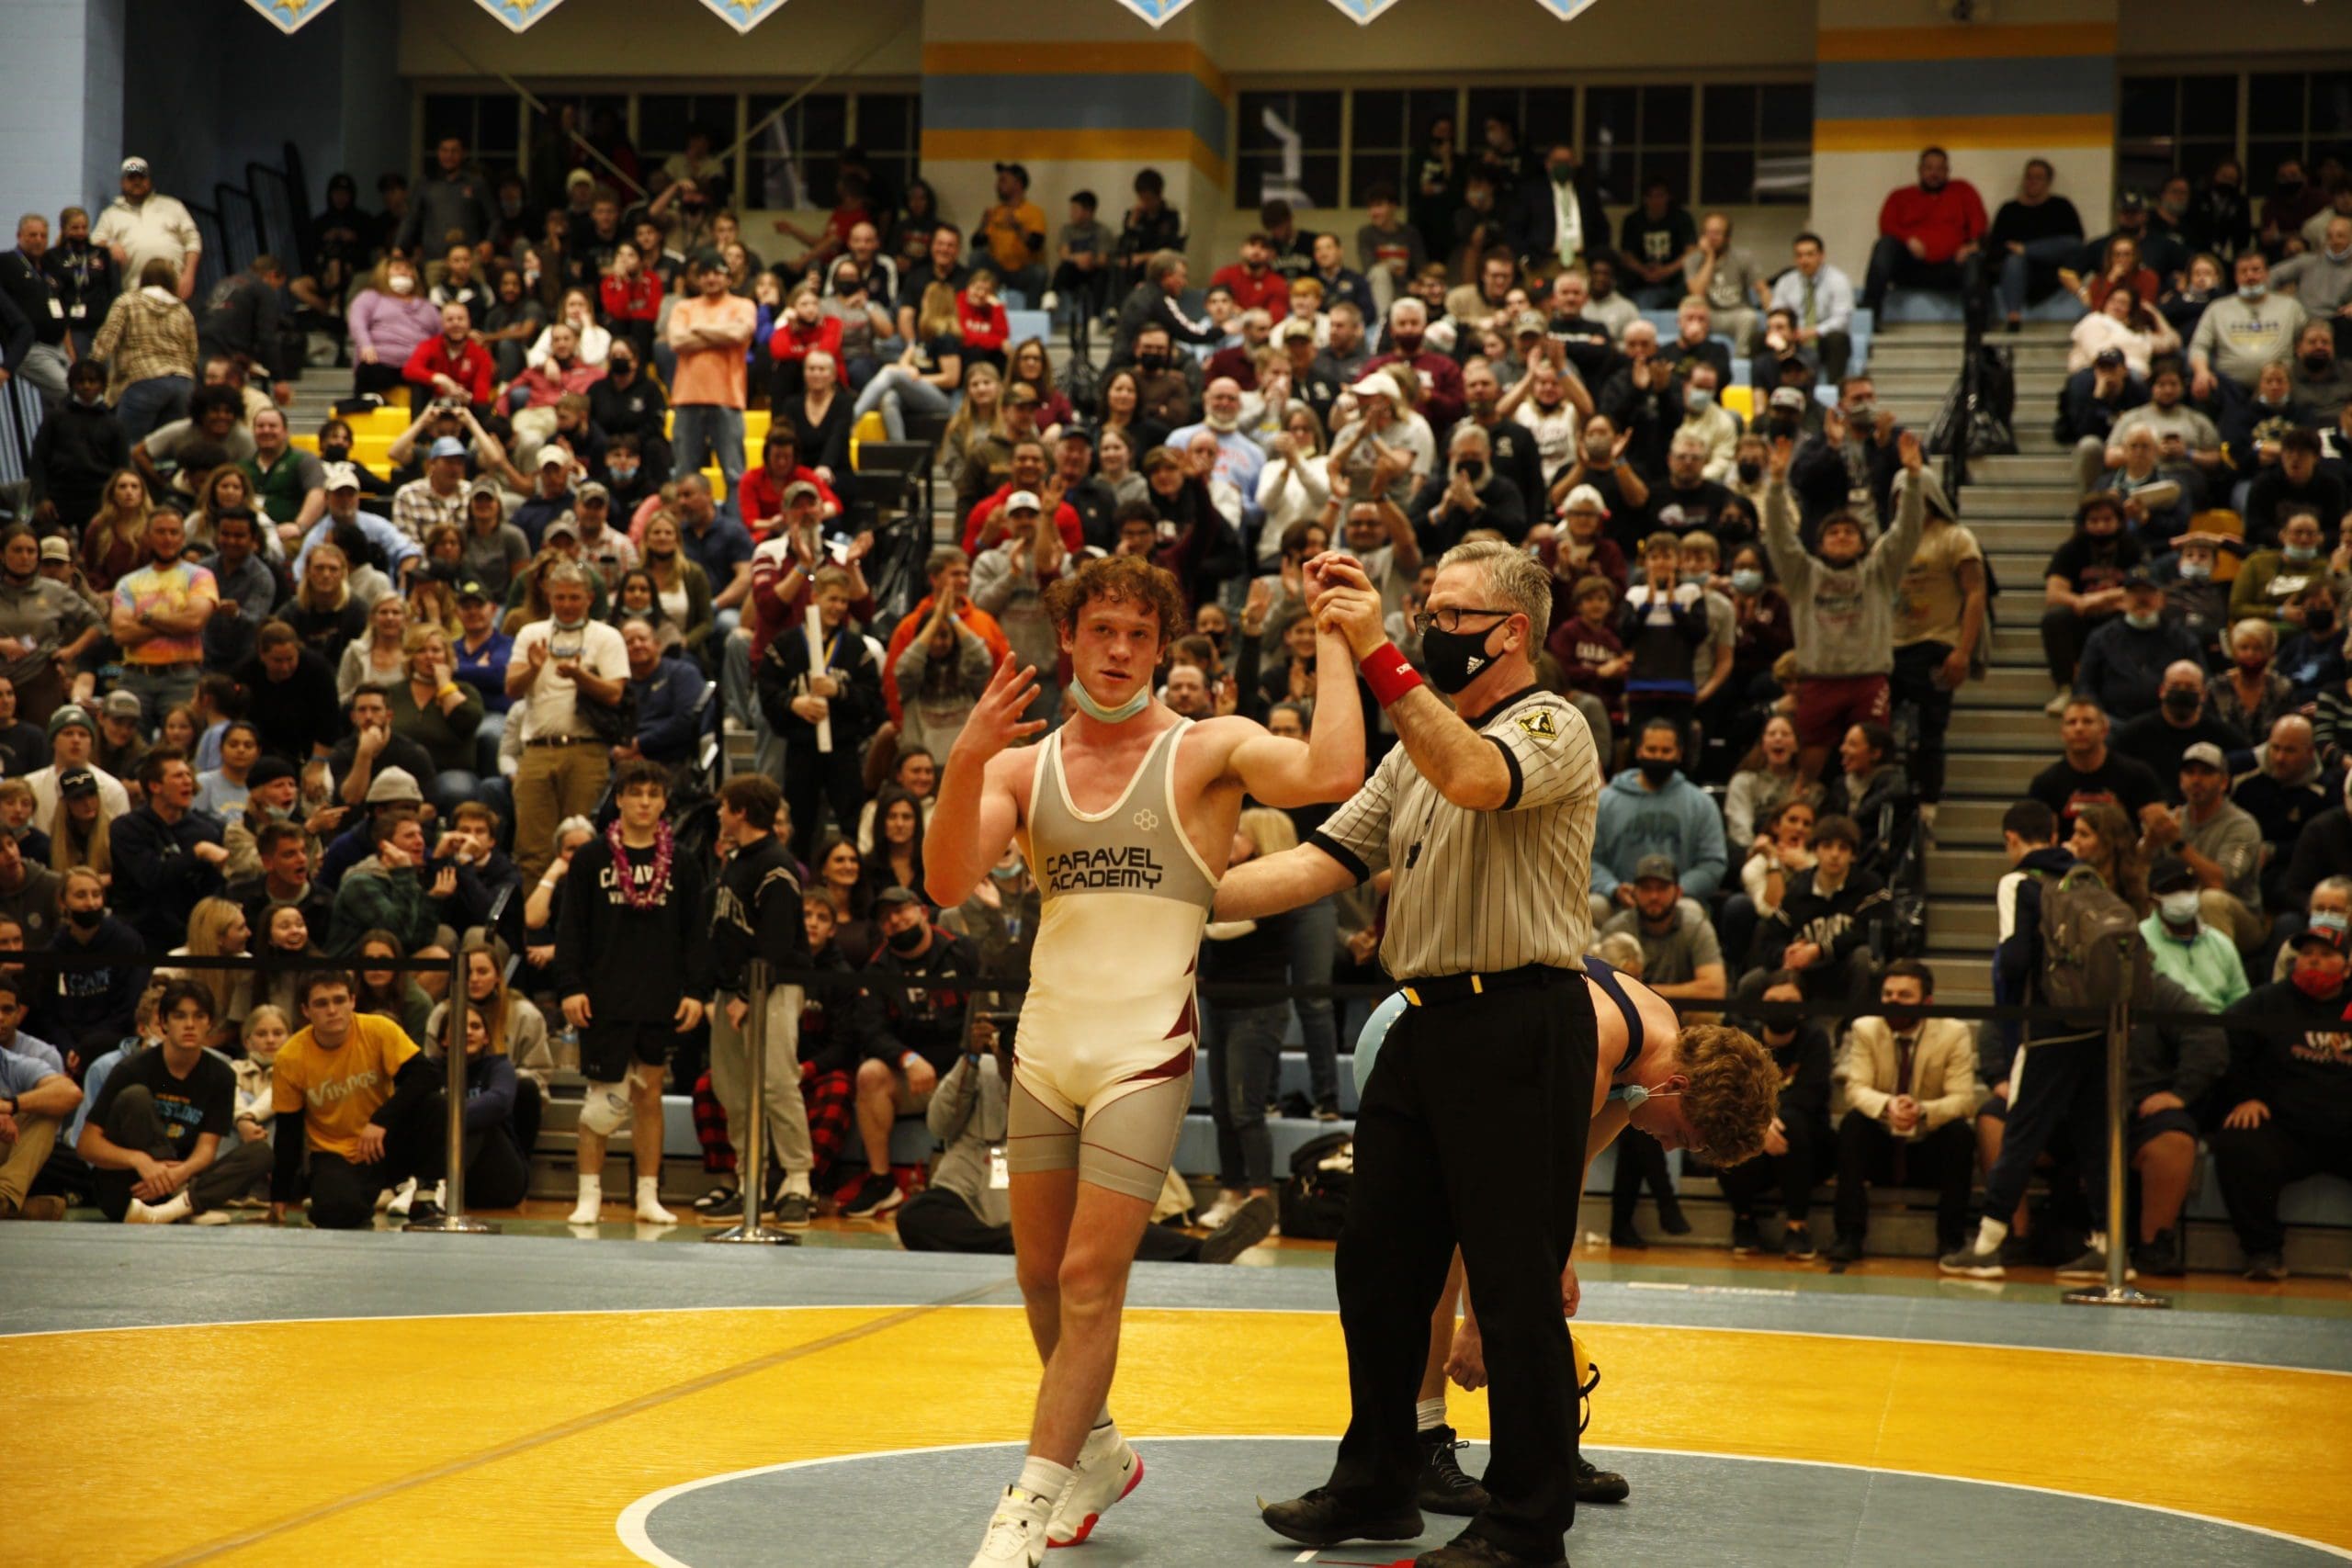 Featured image for “Caravel dominates individual wrestling state championships”